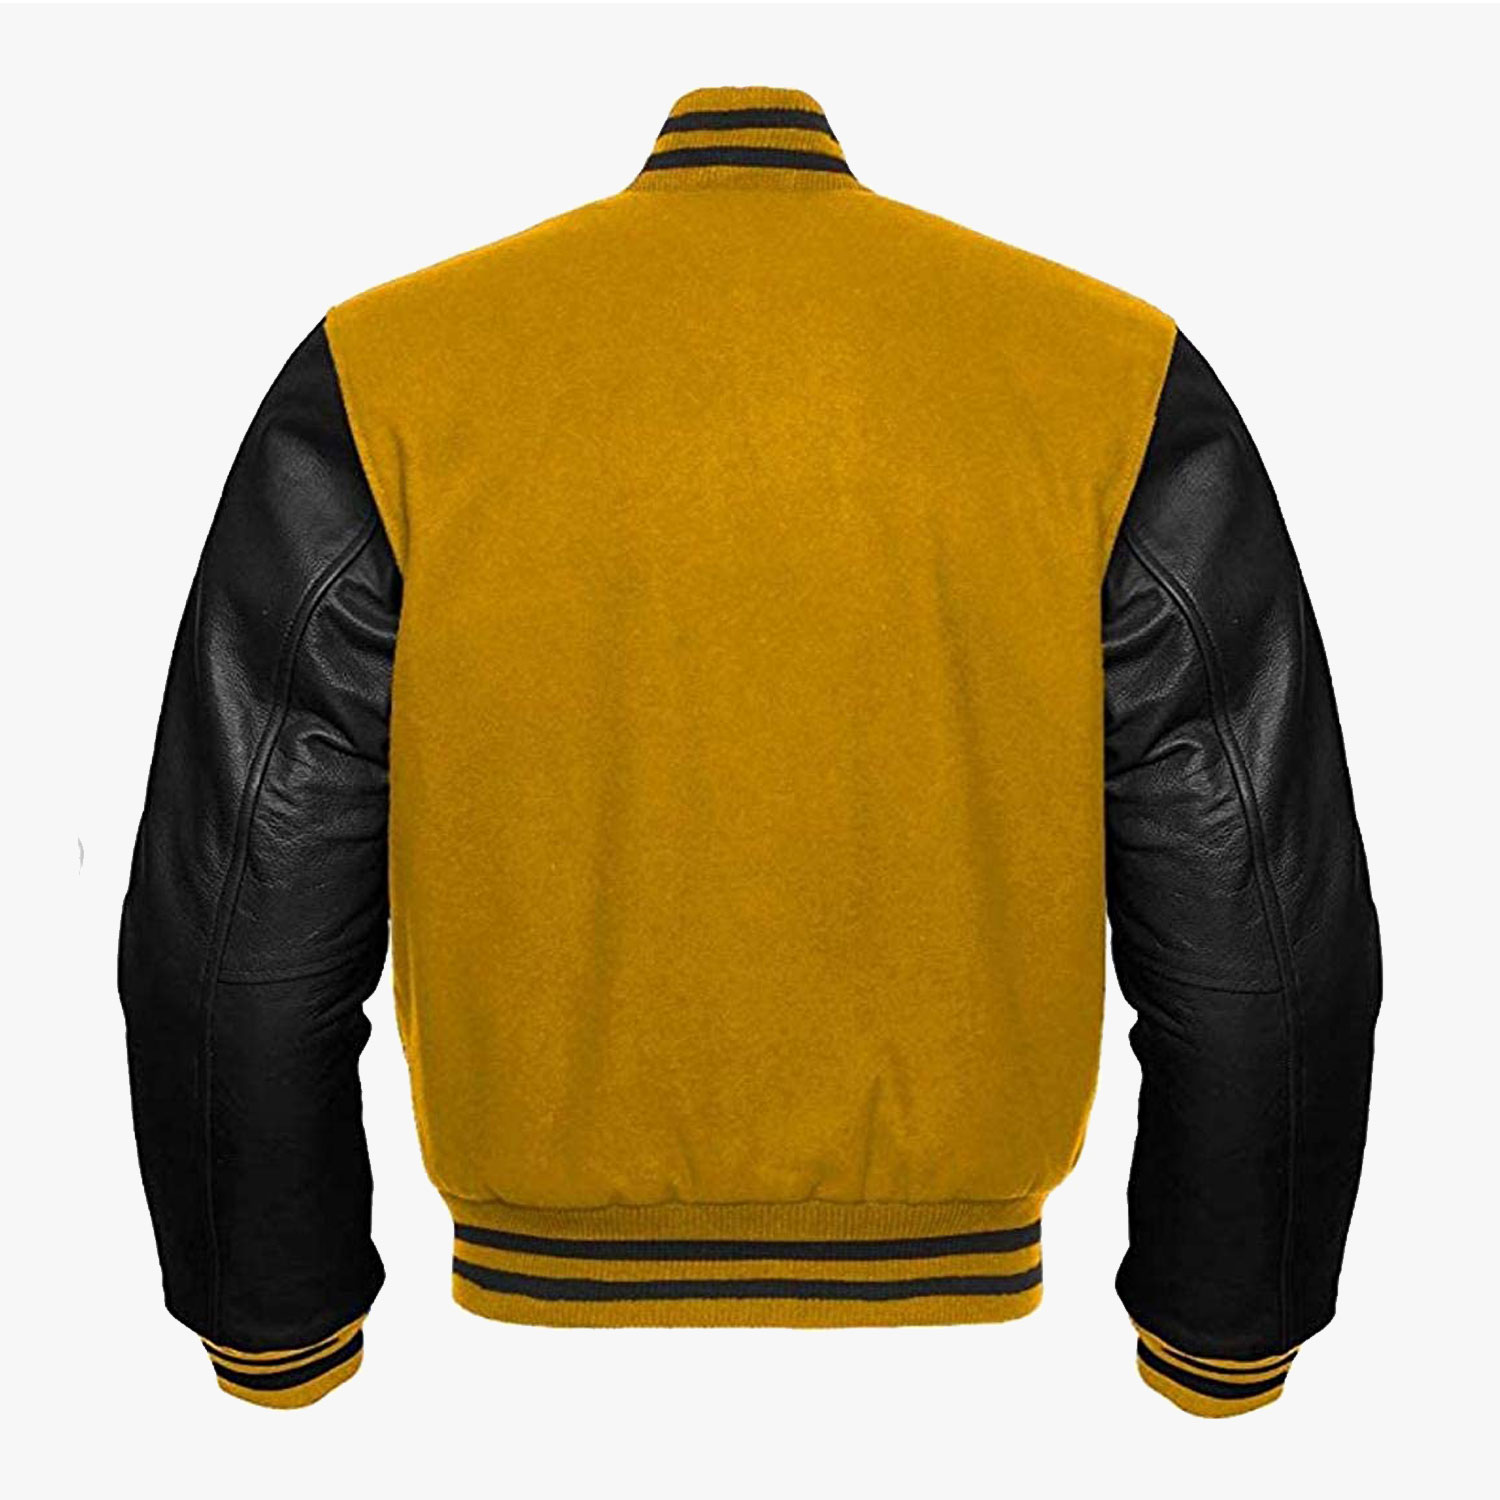 Jacket Makers Letterman LV Yellow and Black Leather Jacket